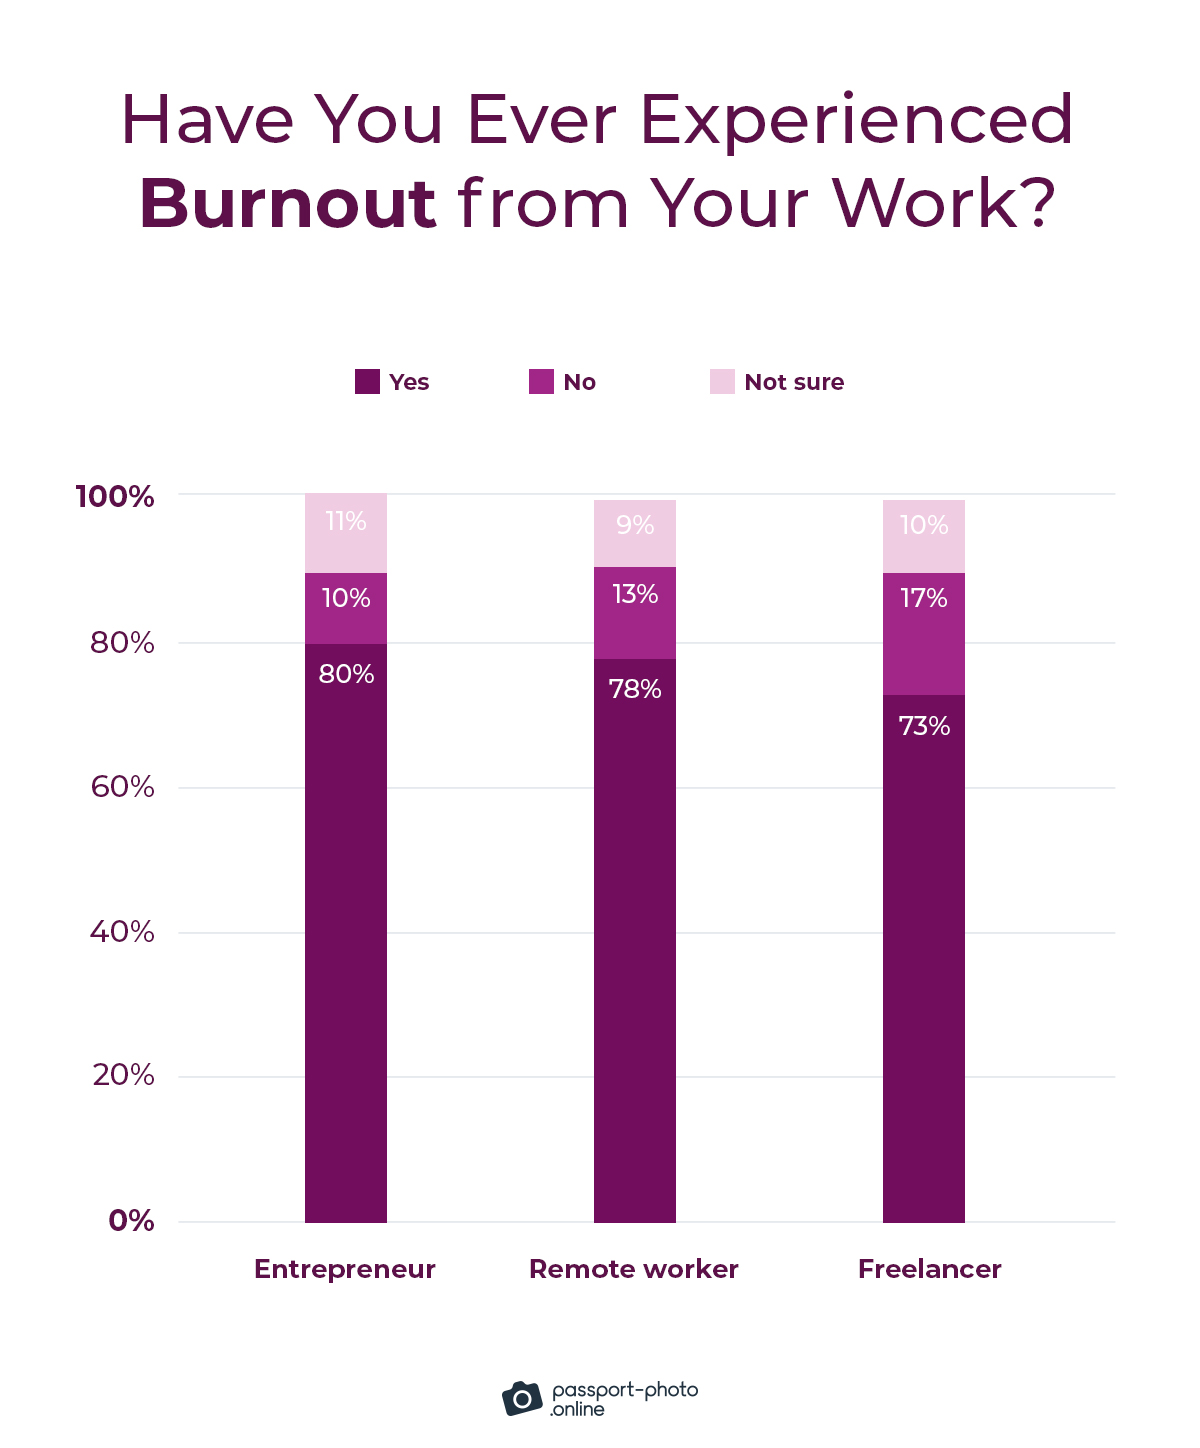 77% of digital nomads have experienced burnout at least once